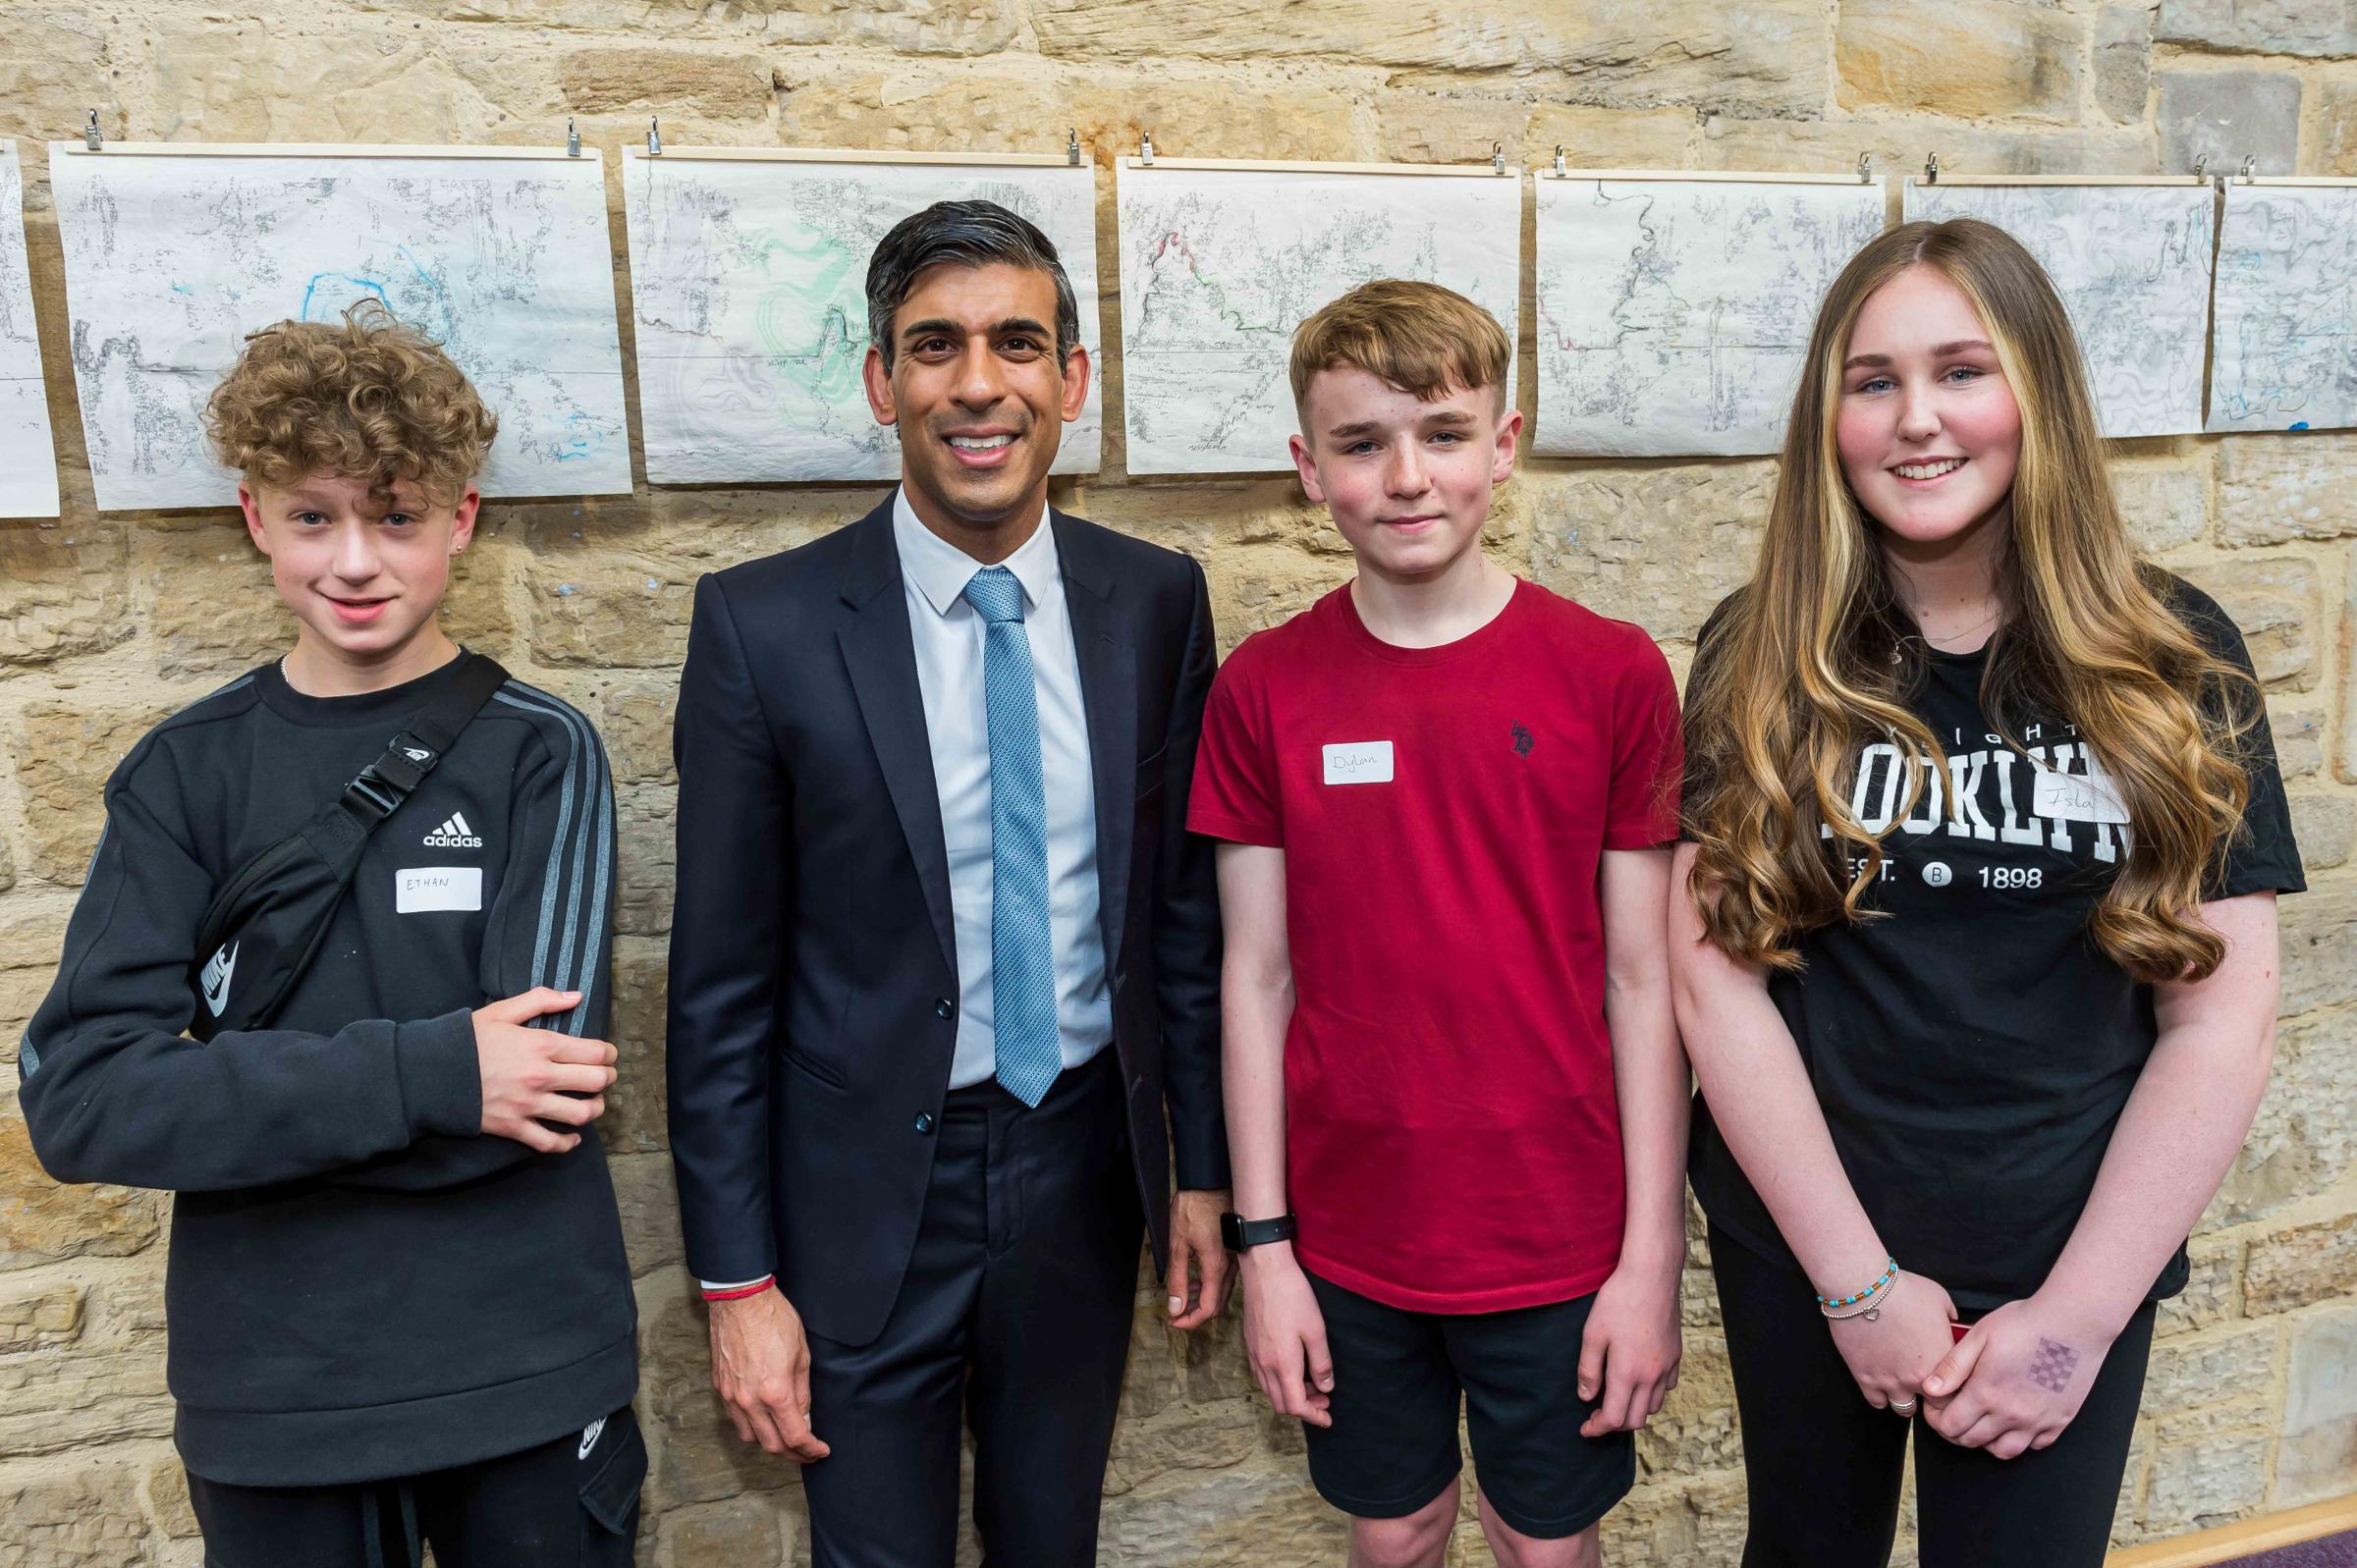 Rishi Sunak with Risedale School Students who created the artwork exhibited at the Station Gallery, at Swaledale Festival Chairmans Reception Picture: Gray Walker - Scenicview Gallery & Studio